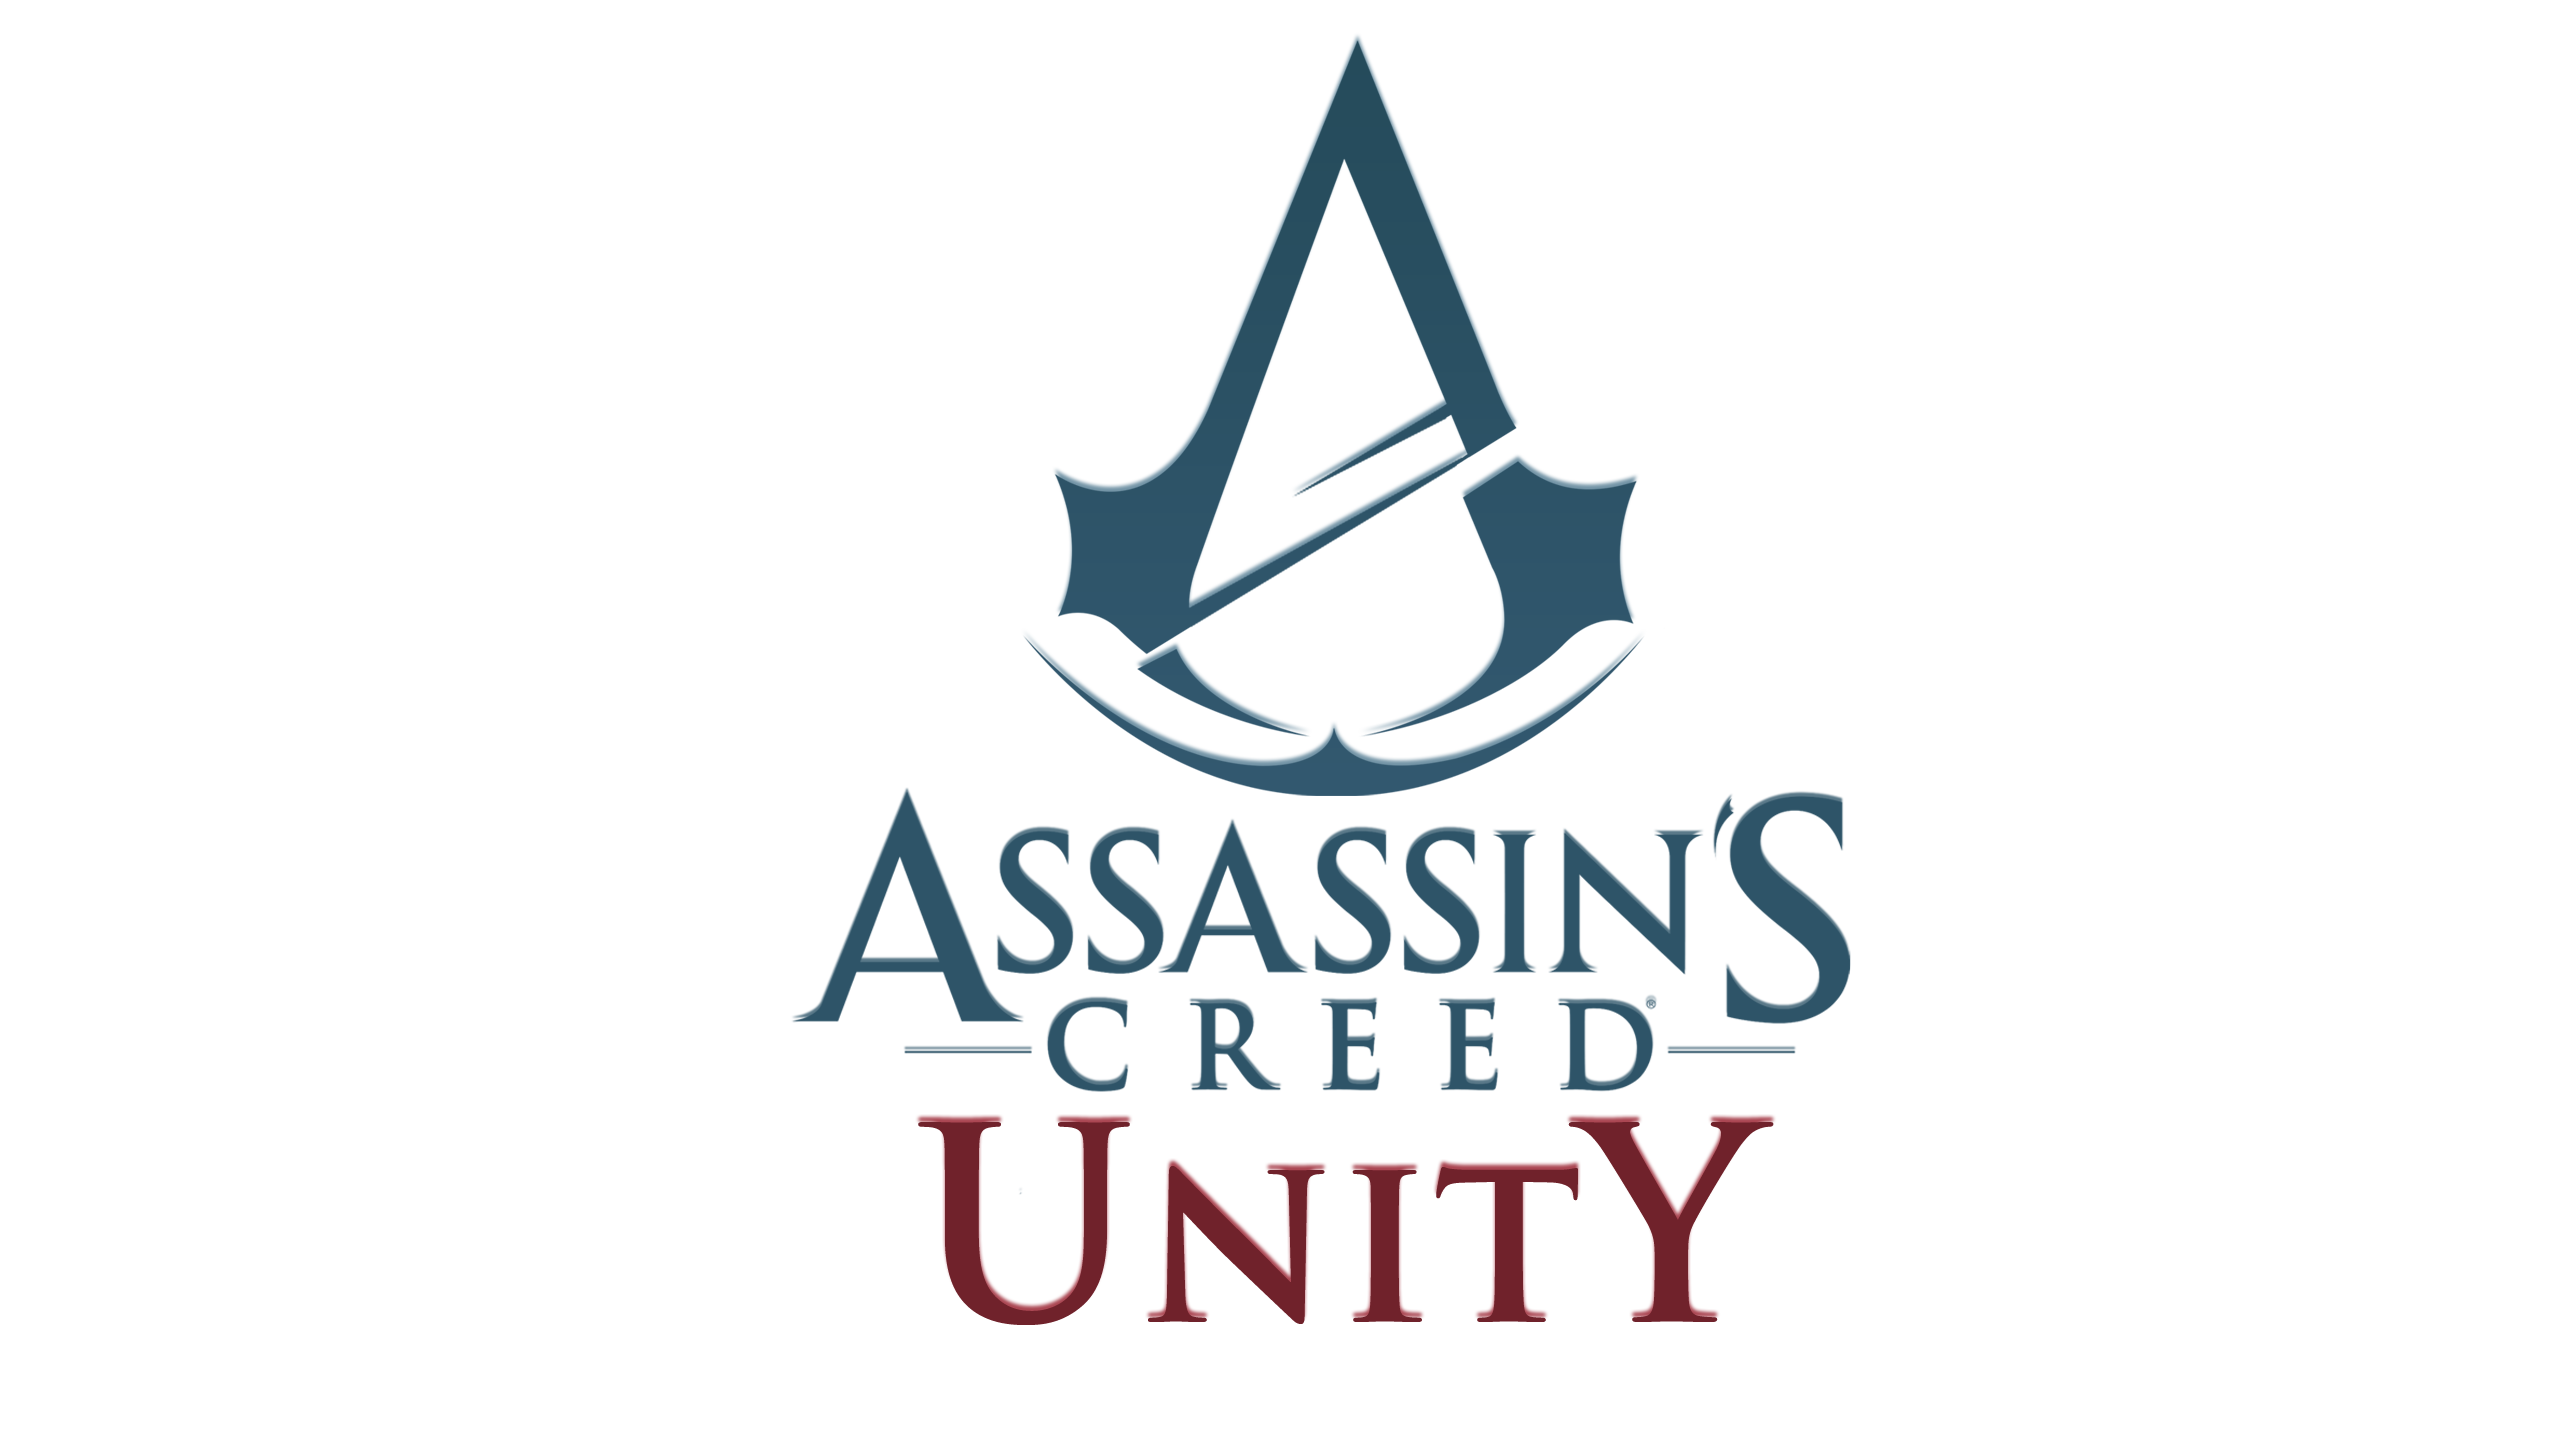 Absence of playable female characters in assassin’s creed unity should not be “a reality of game development”